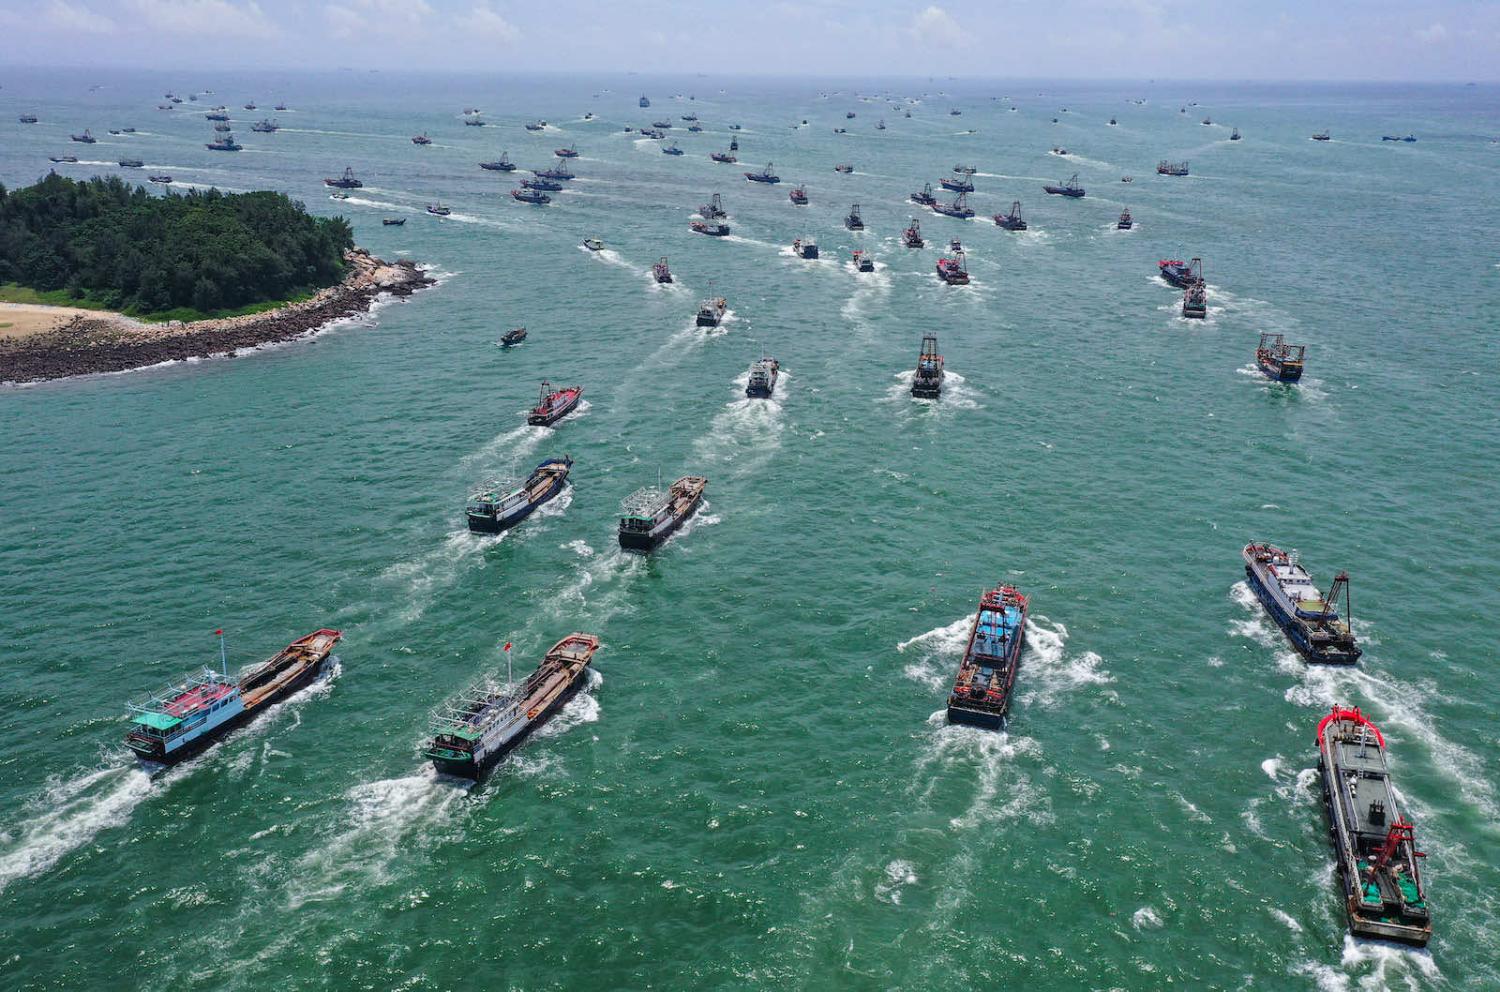 Boats setting sail for fishing grounds in August 2021 from Yangjiang, Guangdong province of China, after a fishing ban in the South China Sea was lifted (Liang Wendong/VCG via Getty Images)